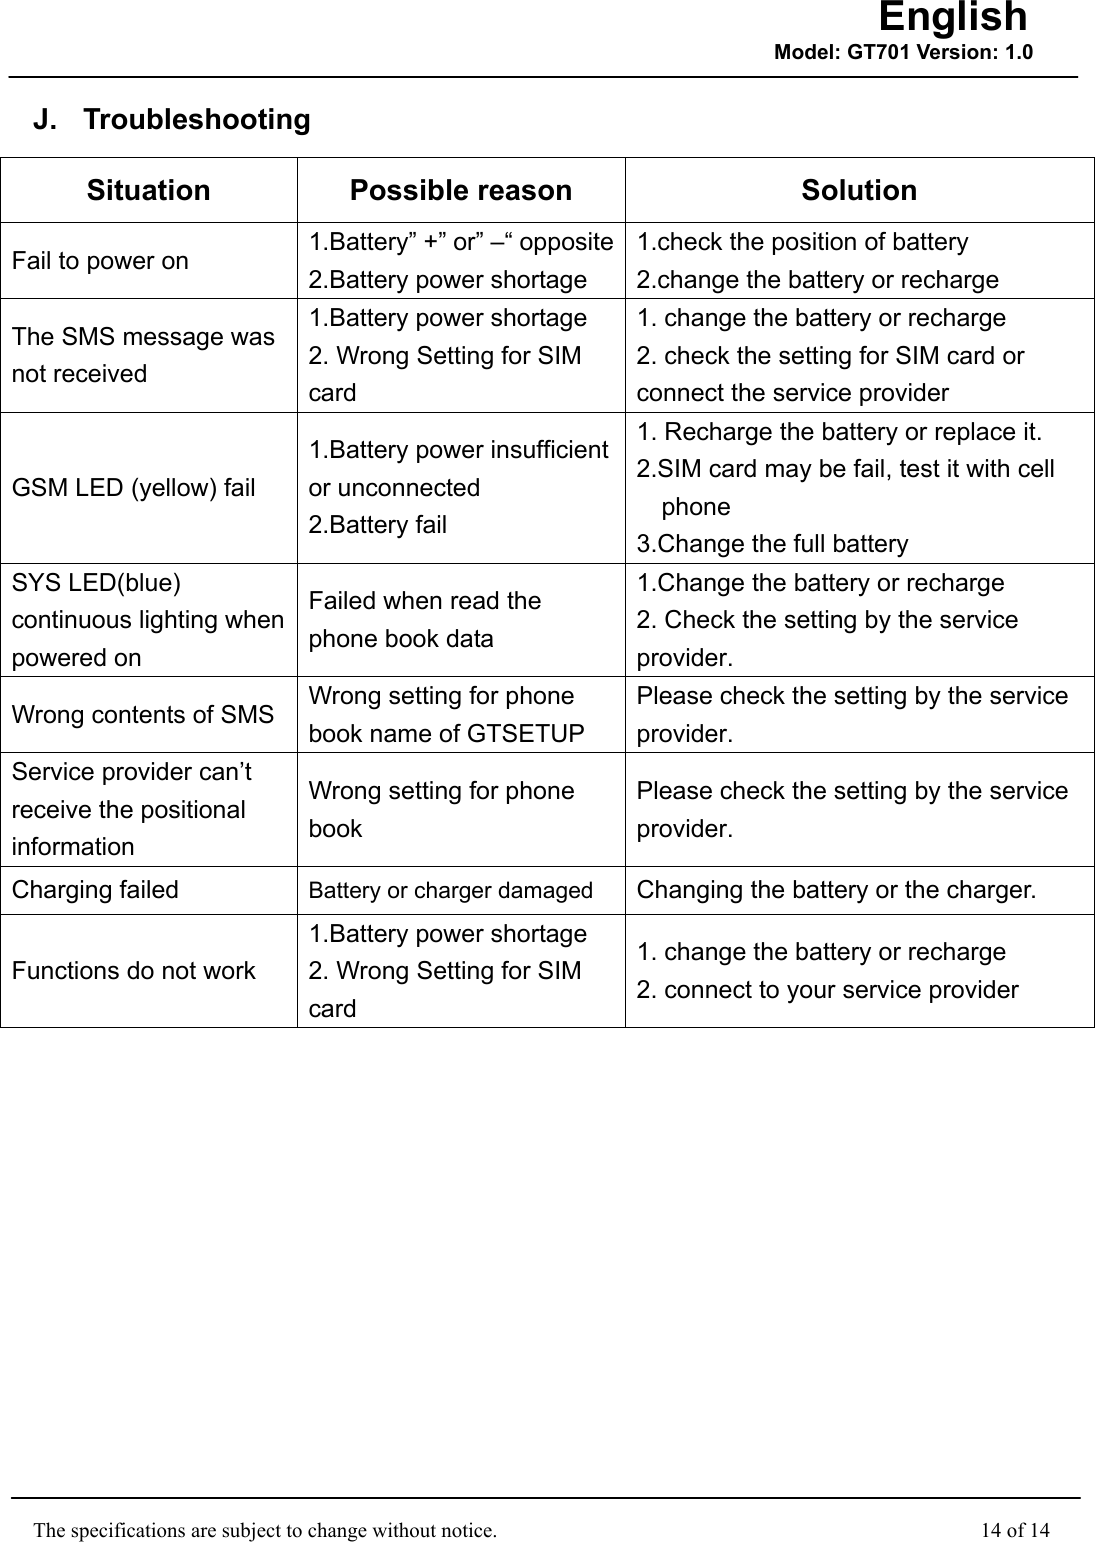                                                    The specifications are subject to change without notice.                                              14 of 14 English Model: GT701 Version: 1.0J.  Troubleshooting Situation Possible reason  Solution Fail to power on  1.Battery” +” or” –“ opposite2.Battery power shortage 1.check the position of battery 2.change the battery or recharge   The SMS message was not received 1.Battery power shortage 2. Wrong Setting for SIM card  1. change the battery or recharge 2. check the setting for SIM card or connect the service provider GSM LED (yellow) fail 1.Battery power insufficient or unconnected 2.Battery fail 1. Recharge the battery or replace it. 2.SIM card may be fail, test it with cell phone 3.Change the full battery SYS LED(blue) continuous lighting when powered on Failed when read the phone book data 1.Change the battery or recharge 2. Check the setting by the service provider. Wrong contents of SMS  Wrong setting for phone book name of GTSETUP Please check the setting by the service provider. Service provider can’t receive the positional information Wrong setting for phone book Please check the setting by the service provider. Charging failed  Battery or charger damaged  Changing the battery or the charger. Functions do not work 1.Battery power shortage 2. Wrong Setting for SIM card  1. change the battery or recharge 2. connect to your service provider  